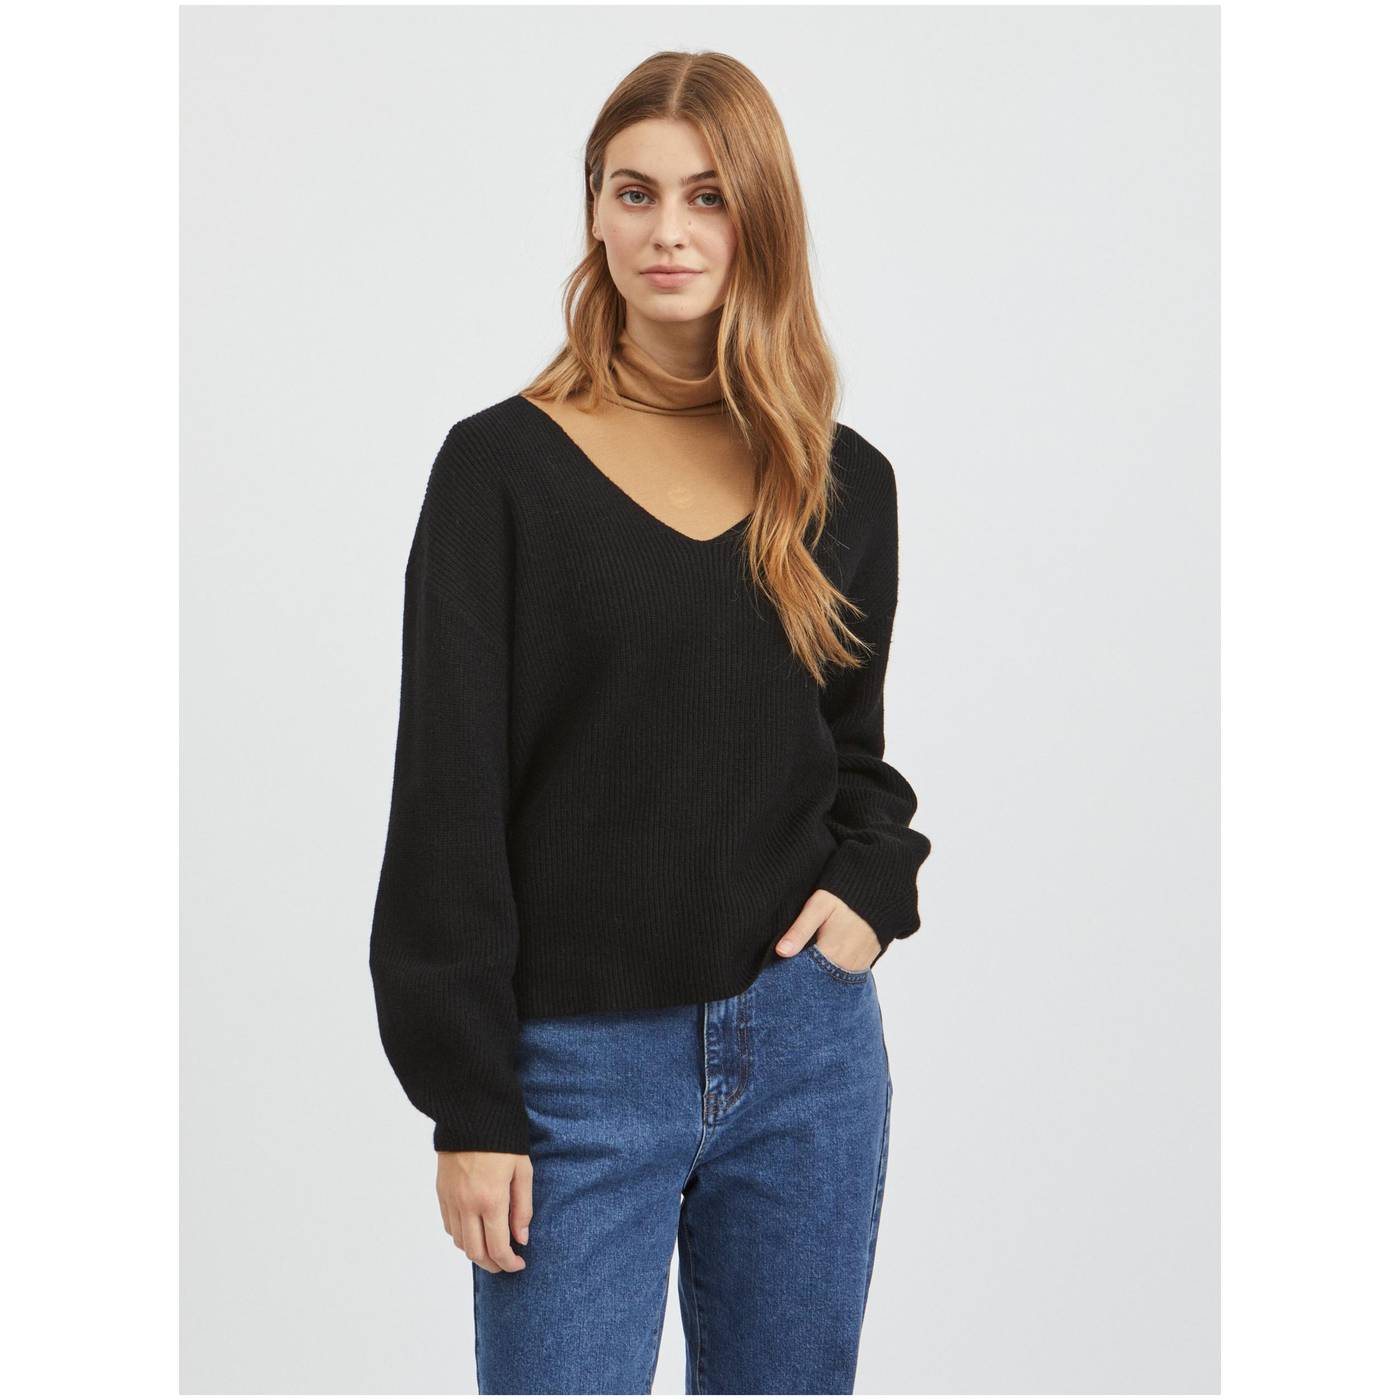 Black Women's Loose Ribbed Sweater with Clamshell Neck VILA Ril - Women